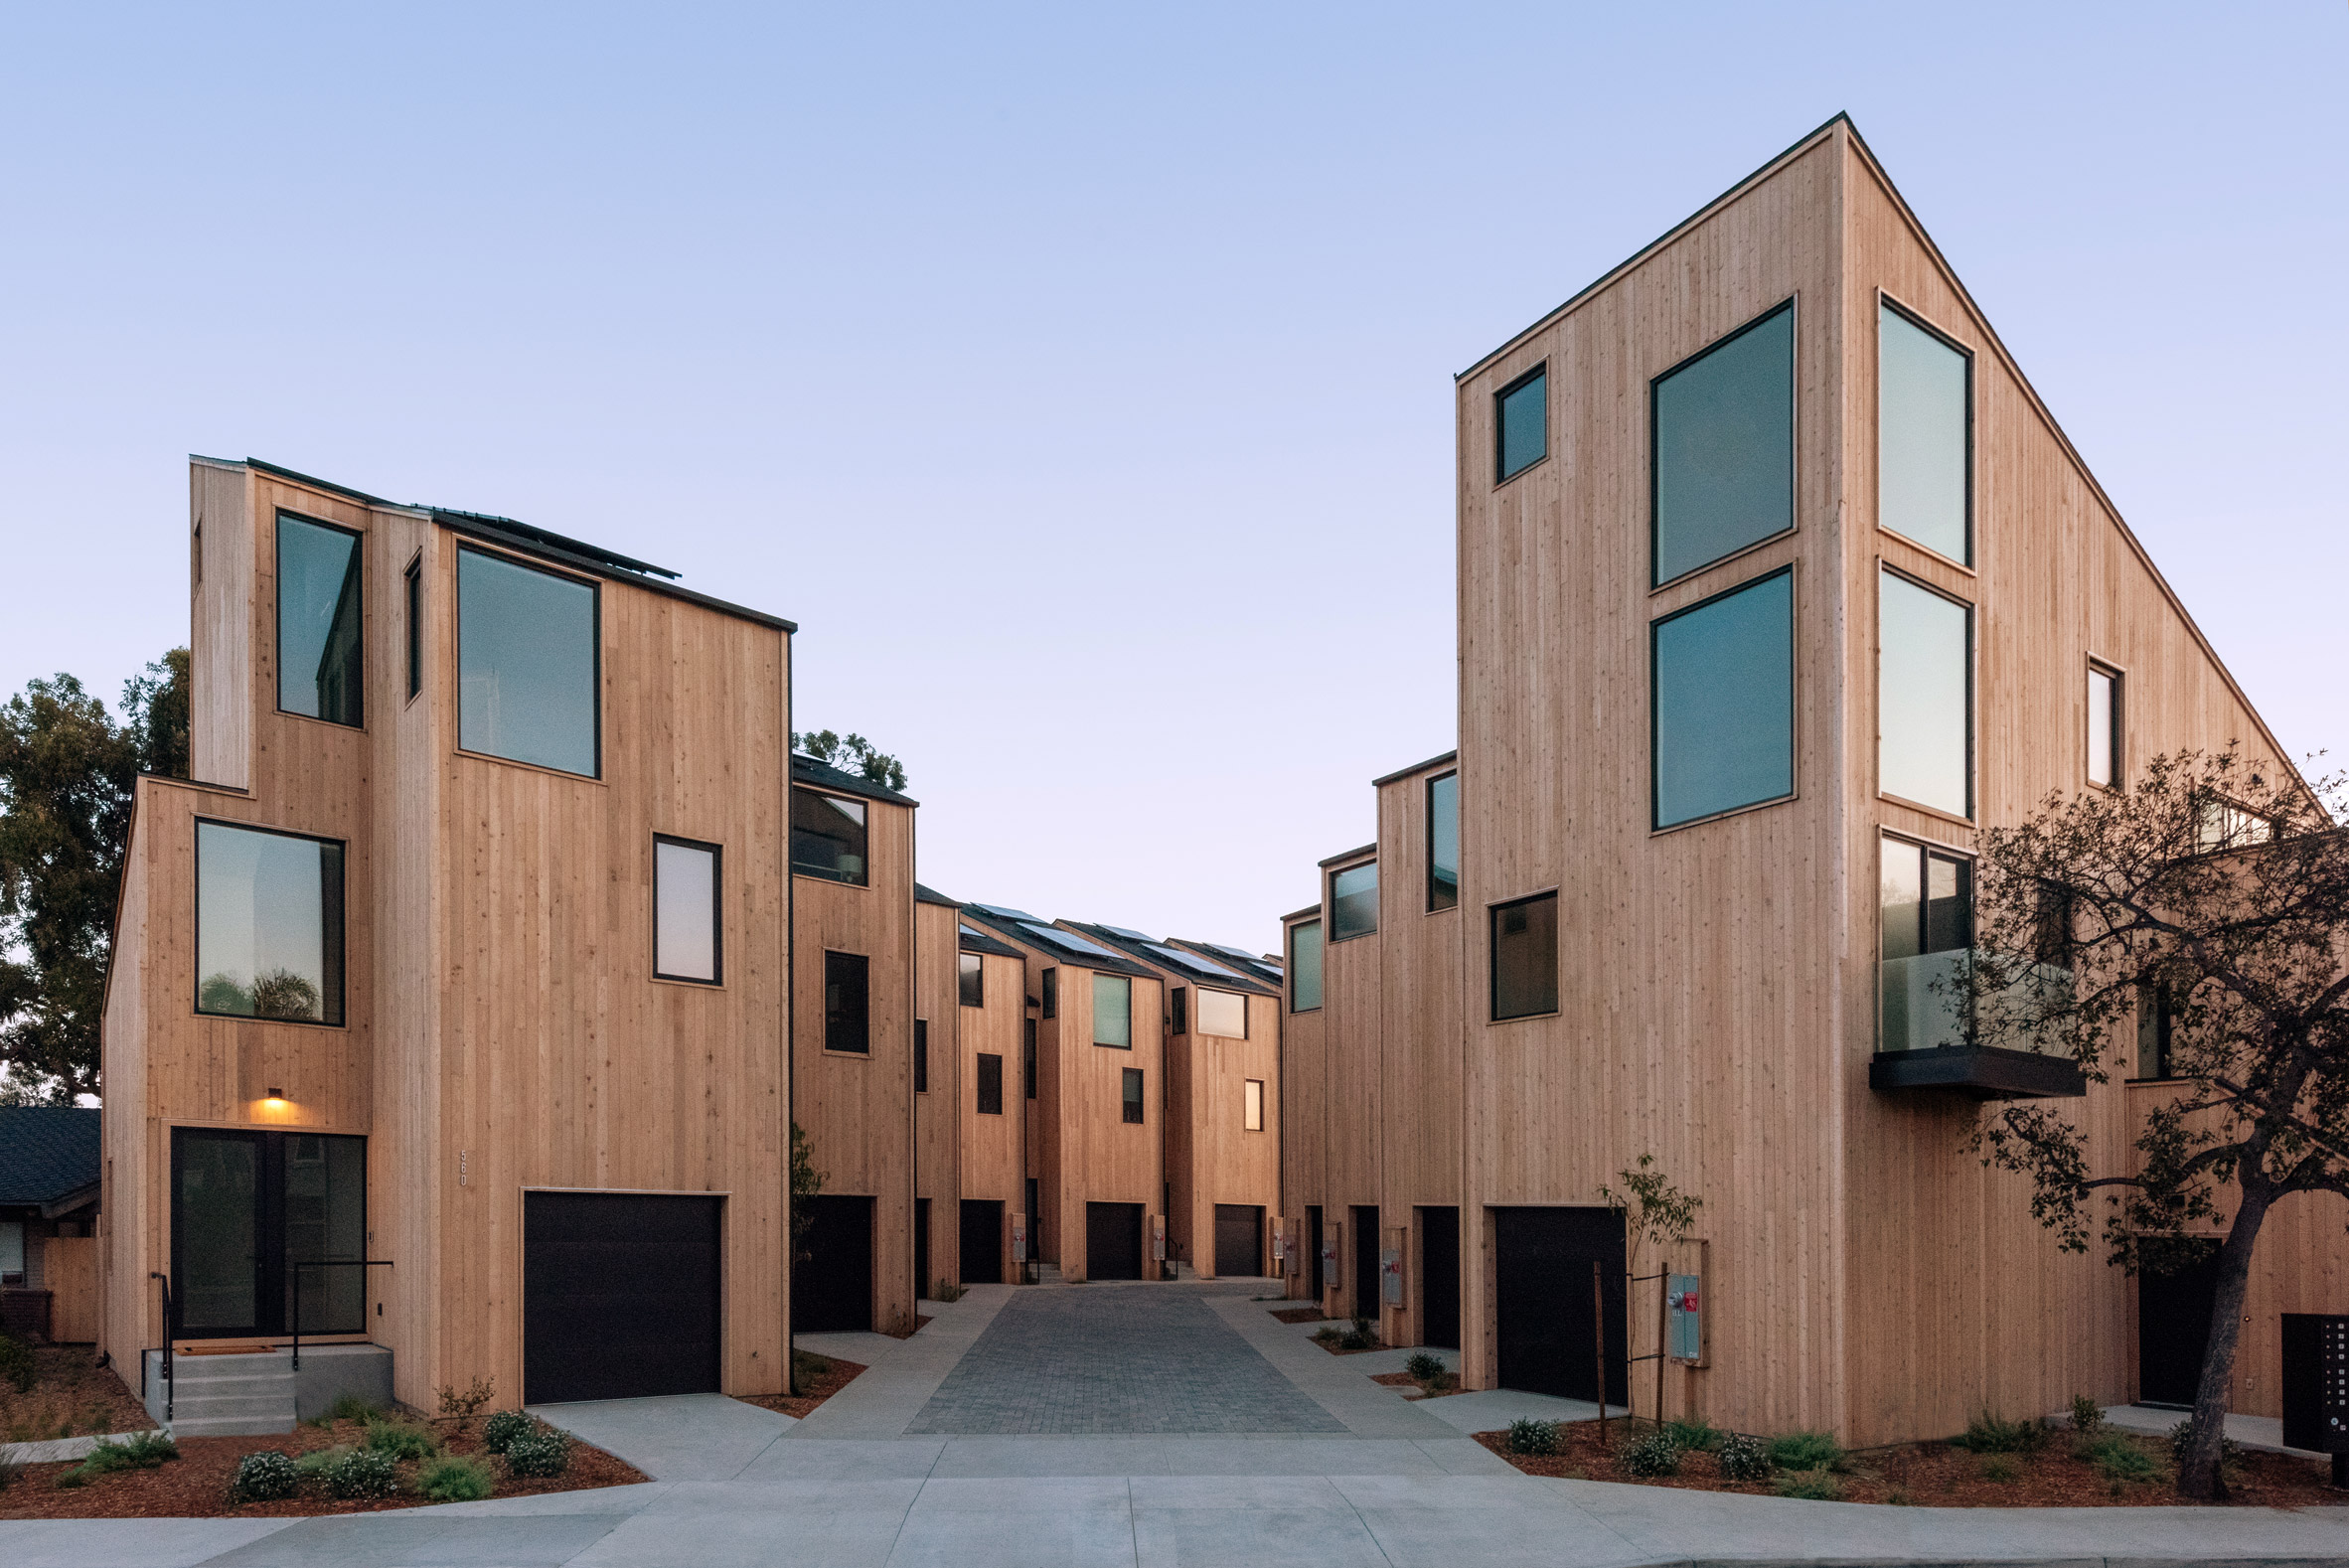 Wooden row houses in San Diego